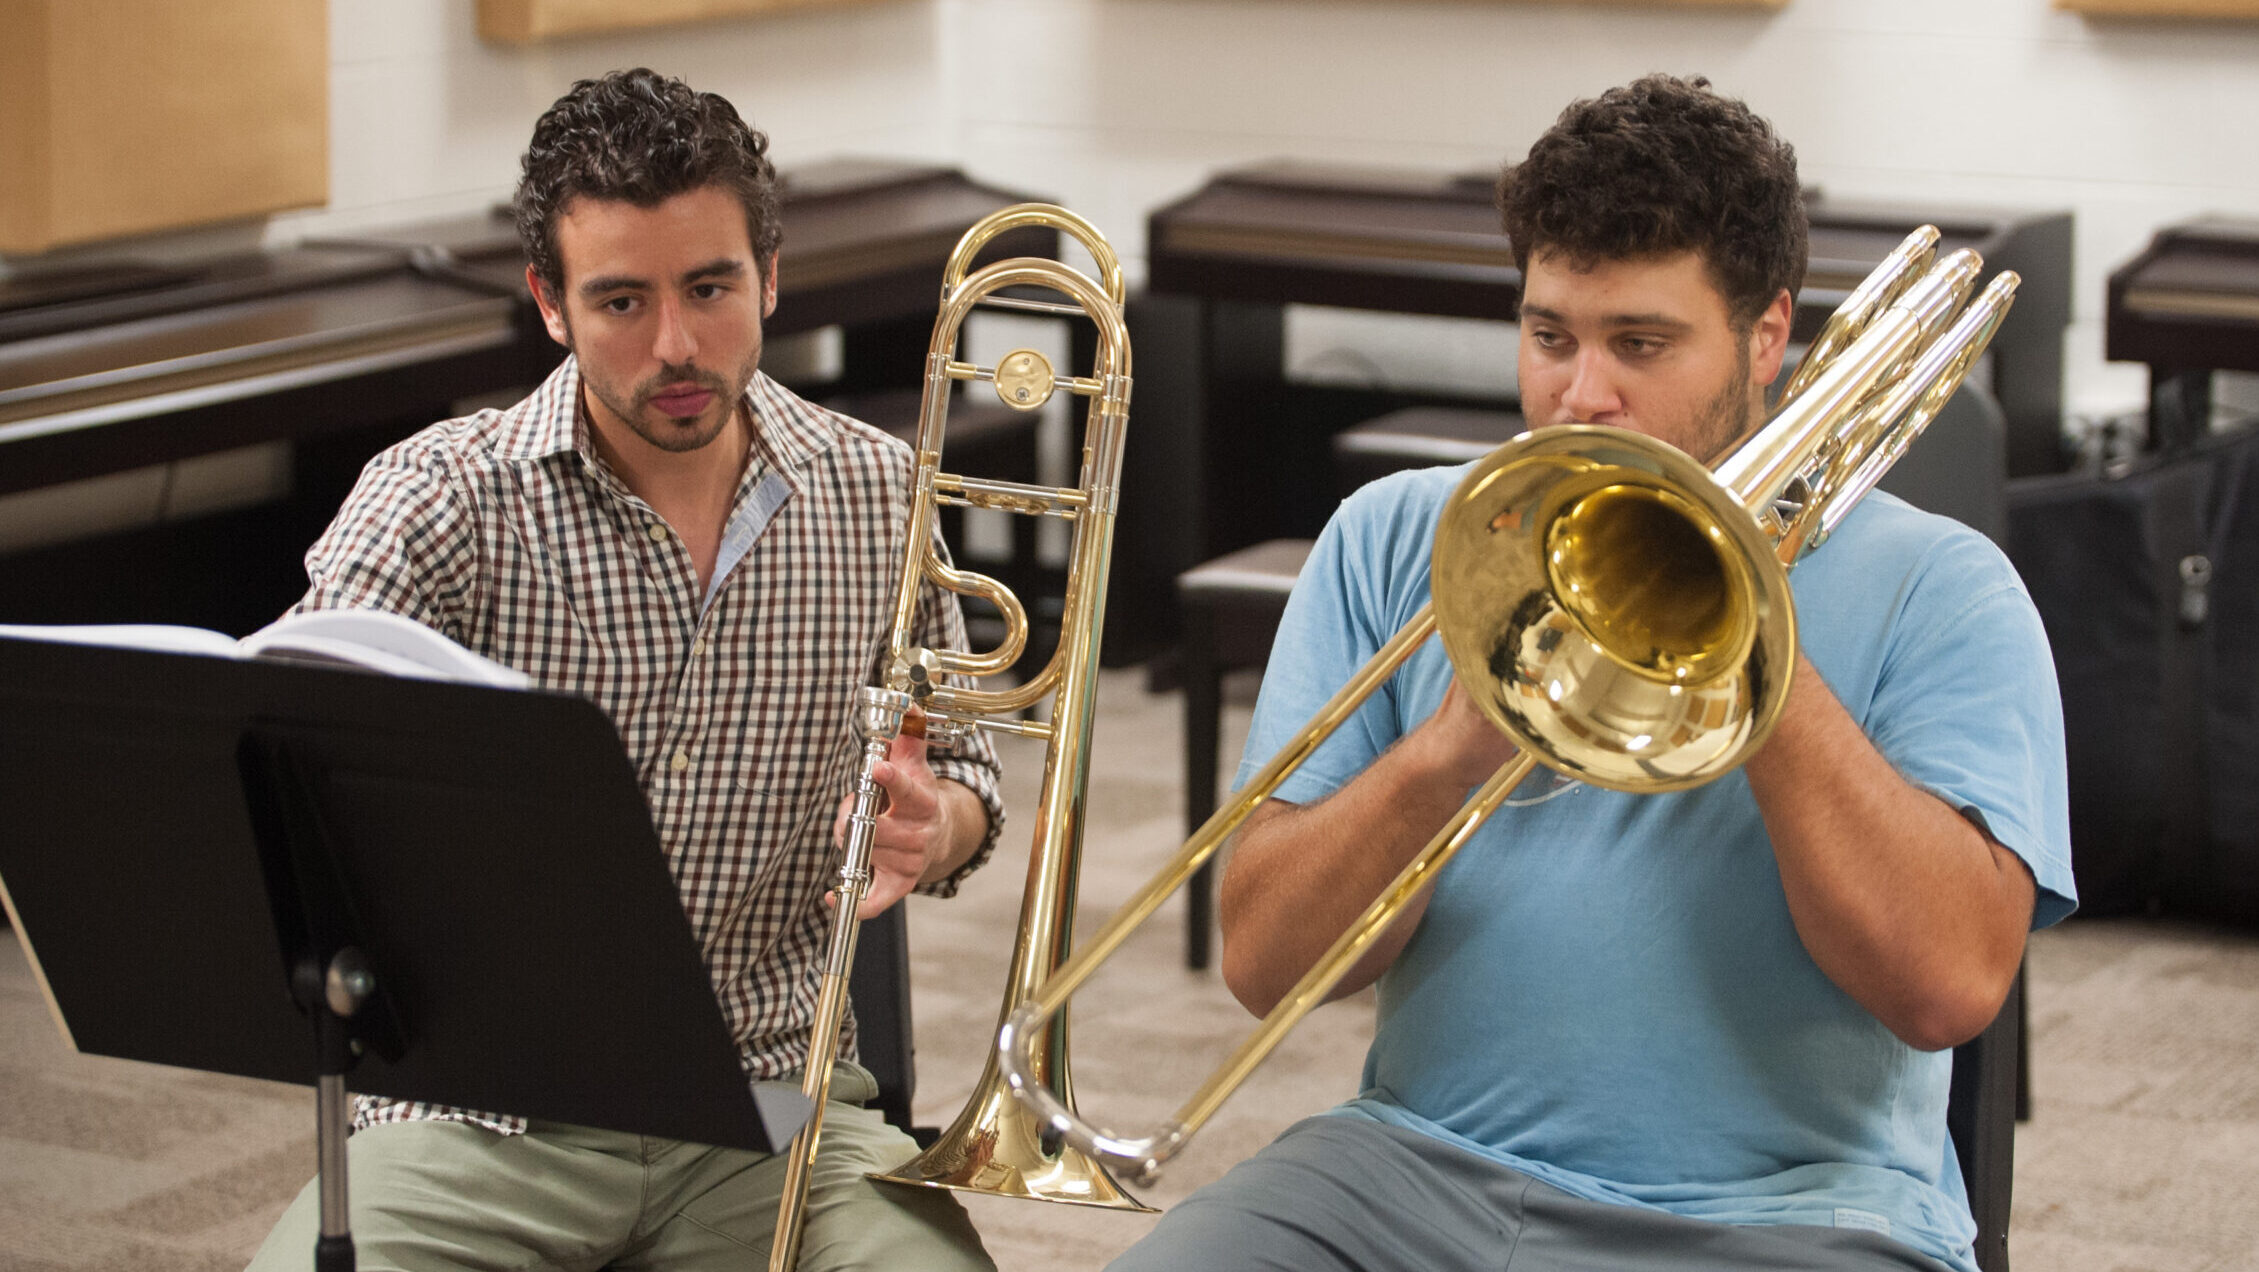 A trombone instructor assists their student during a lesson.